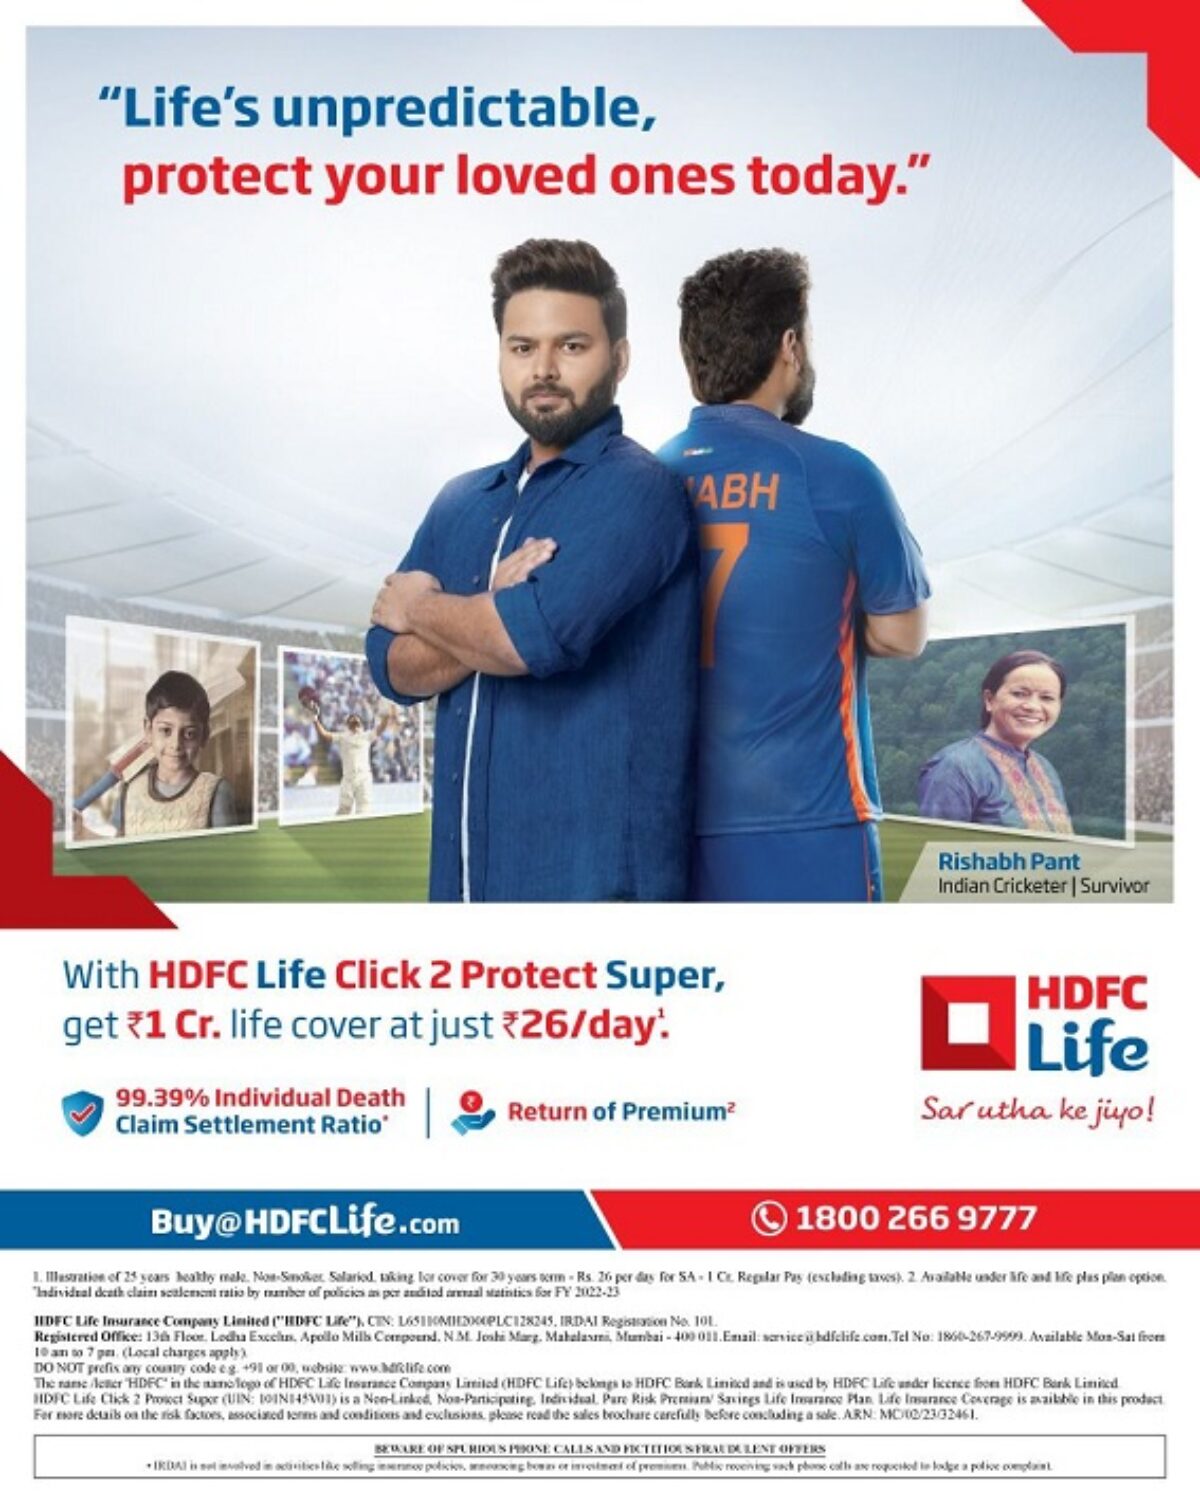 Rishabh Pant Features in HDFC Life's Latest Campaign on Term Insurance